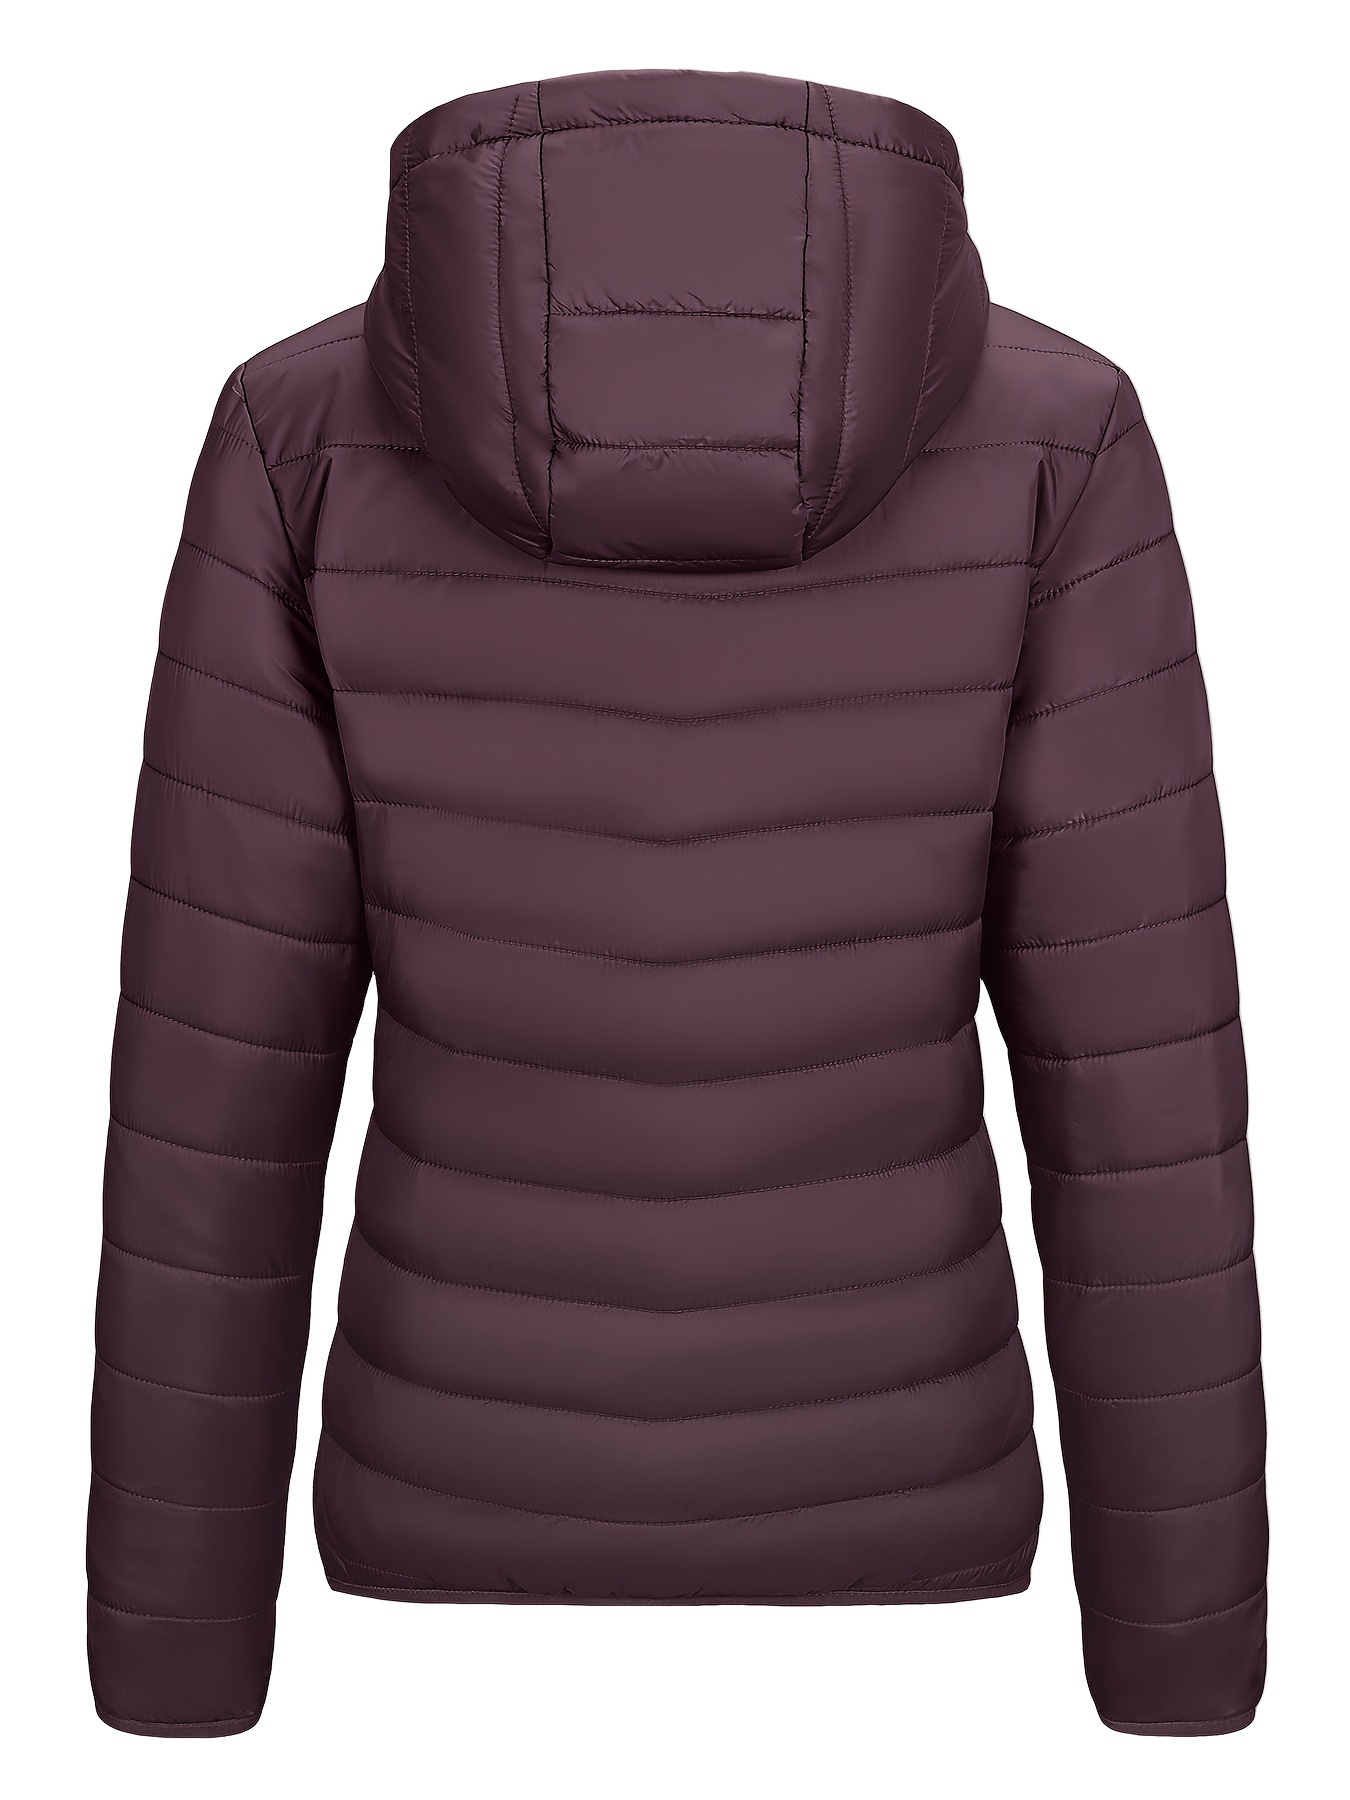 Women's Quilted Lightweight Jackets with Hood Sherpa Lined Down